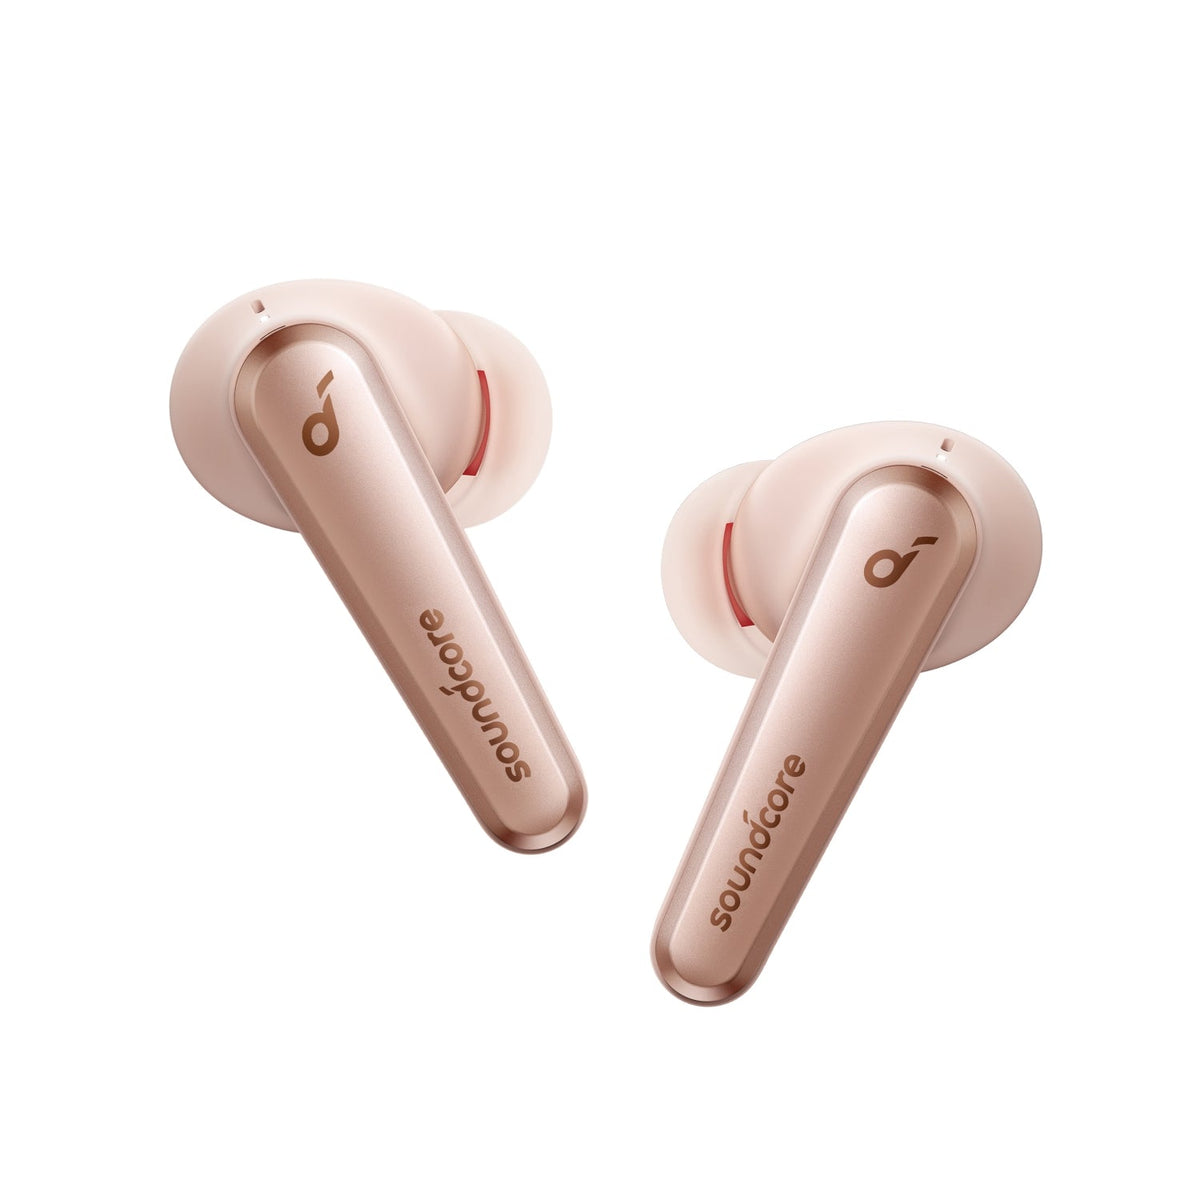 anker soundcore liberty air 2 pro wireless earbuds